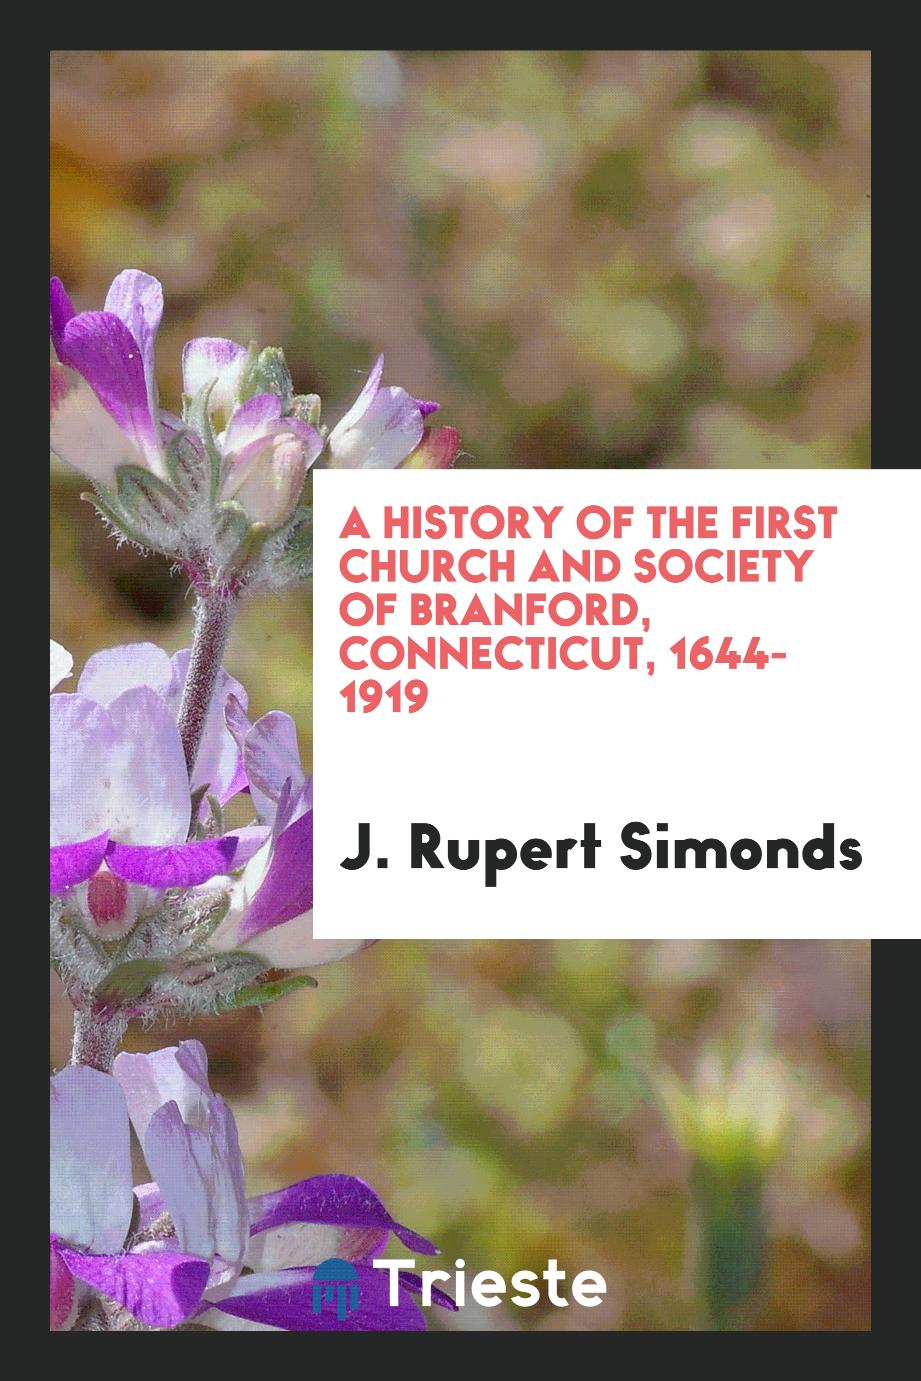 A history of the First Church and Society of Branford, Connecticut, 1644-1919